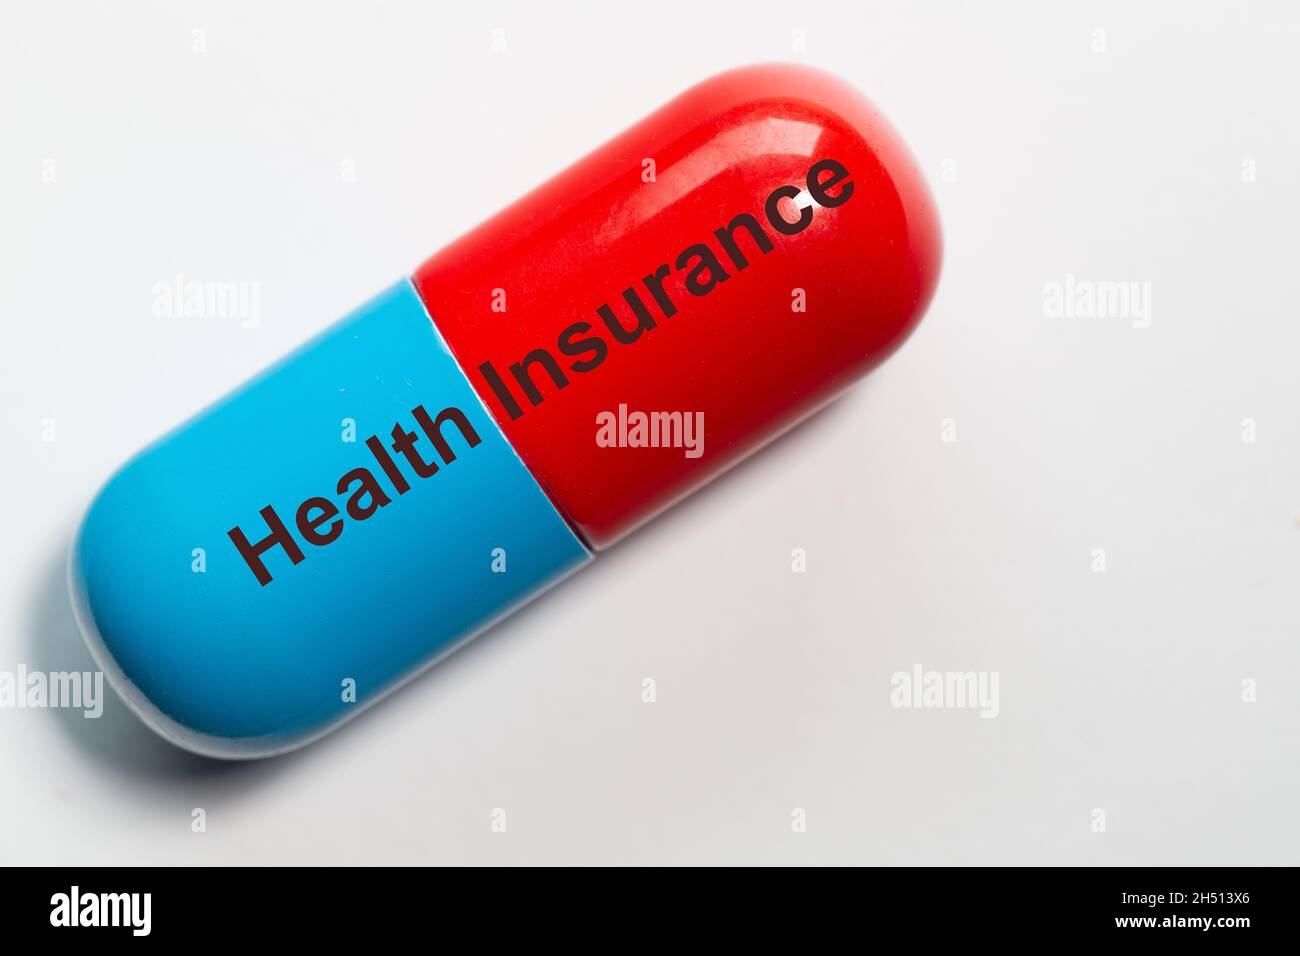 a pill in blue and red as a smbol photo has the words  Health Insurance on it. The pill is isolated against a white background. Stock Photo